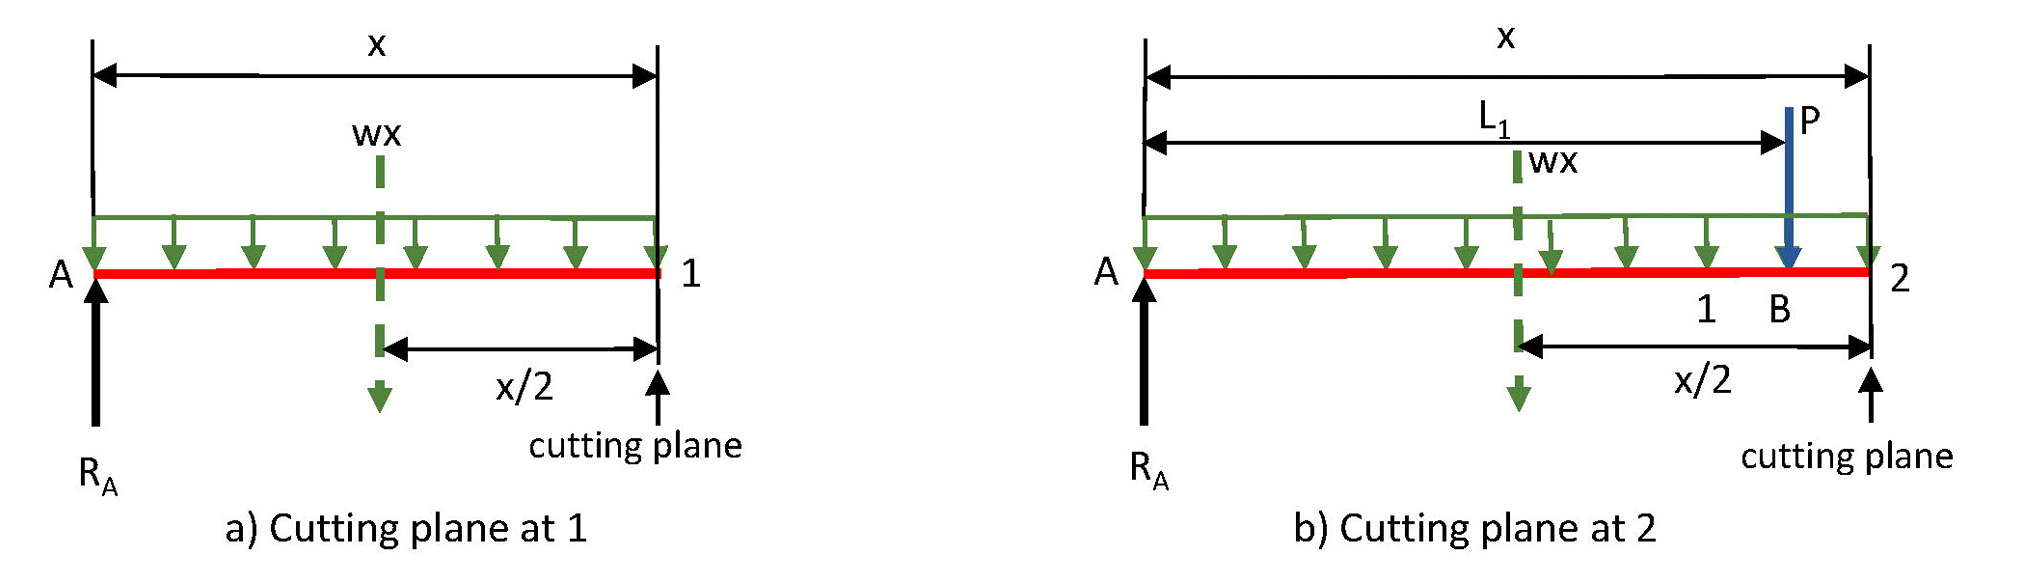 Diagrams used in the calculations of the shear and bending moment. 